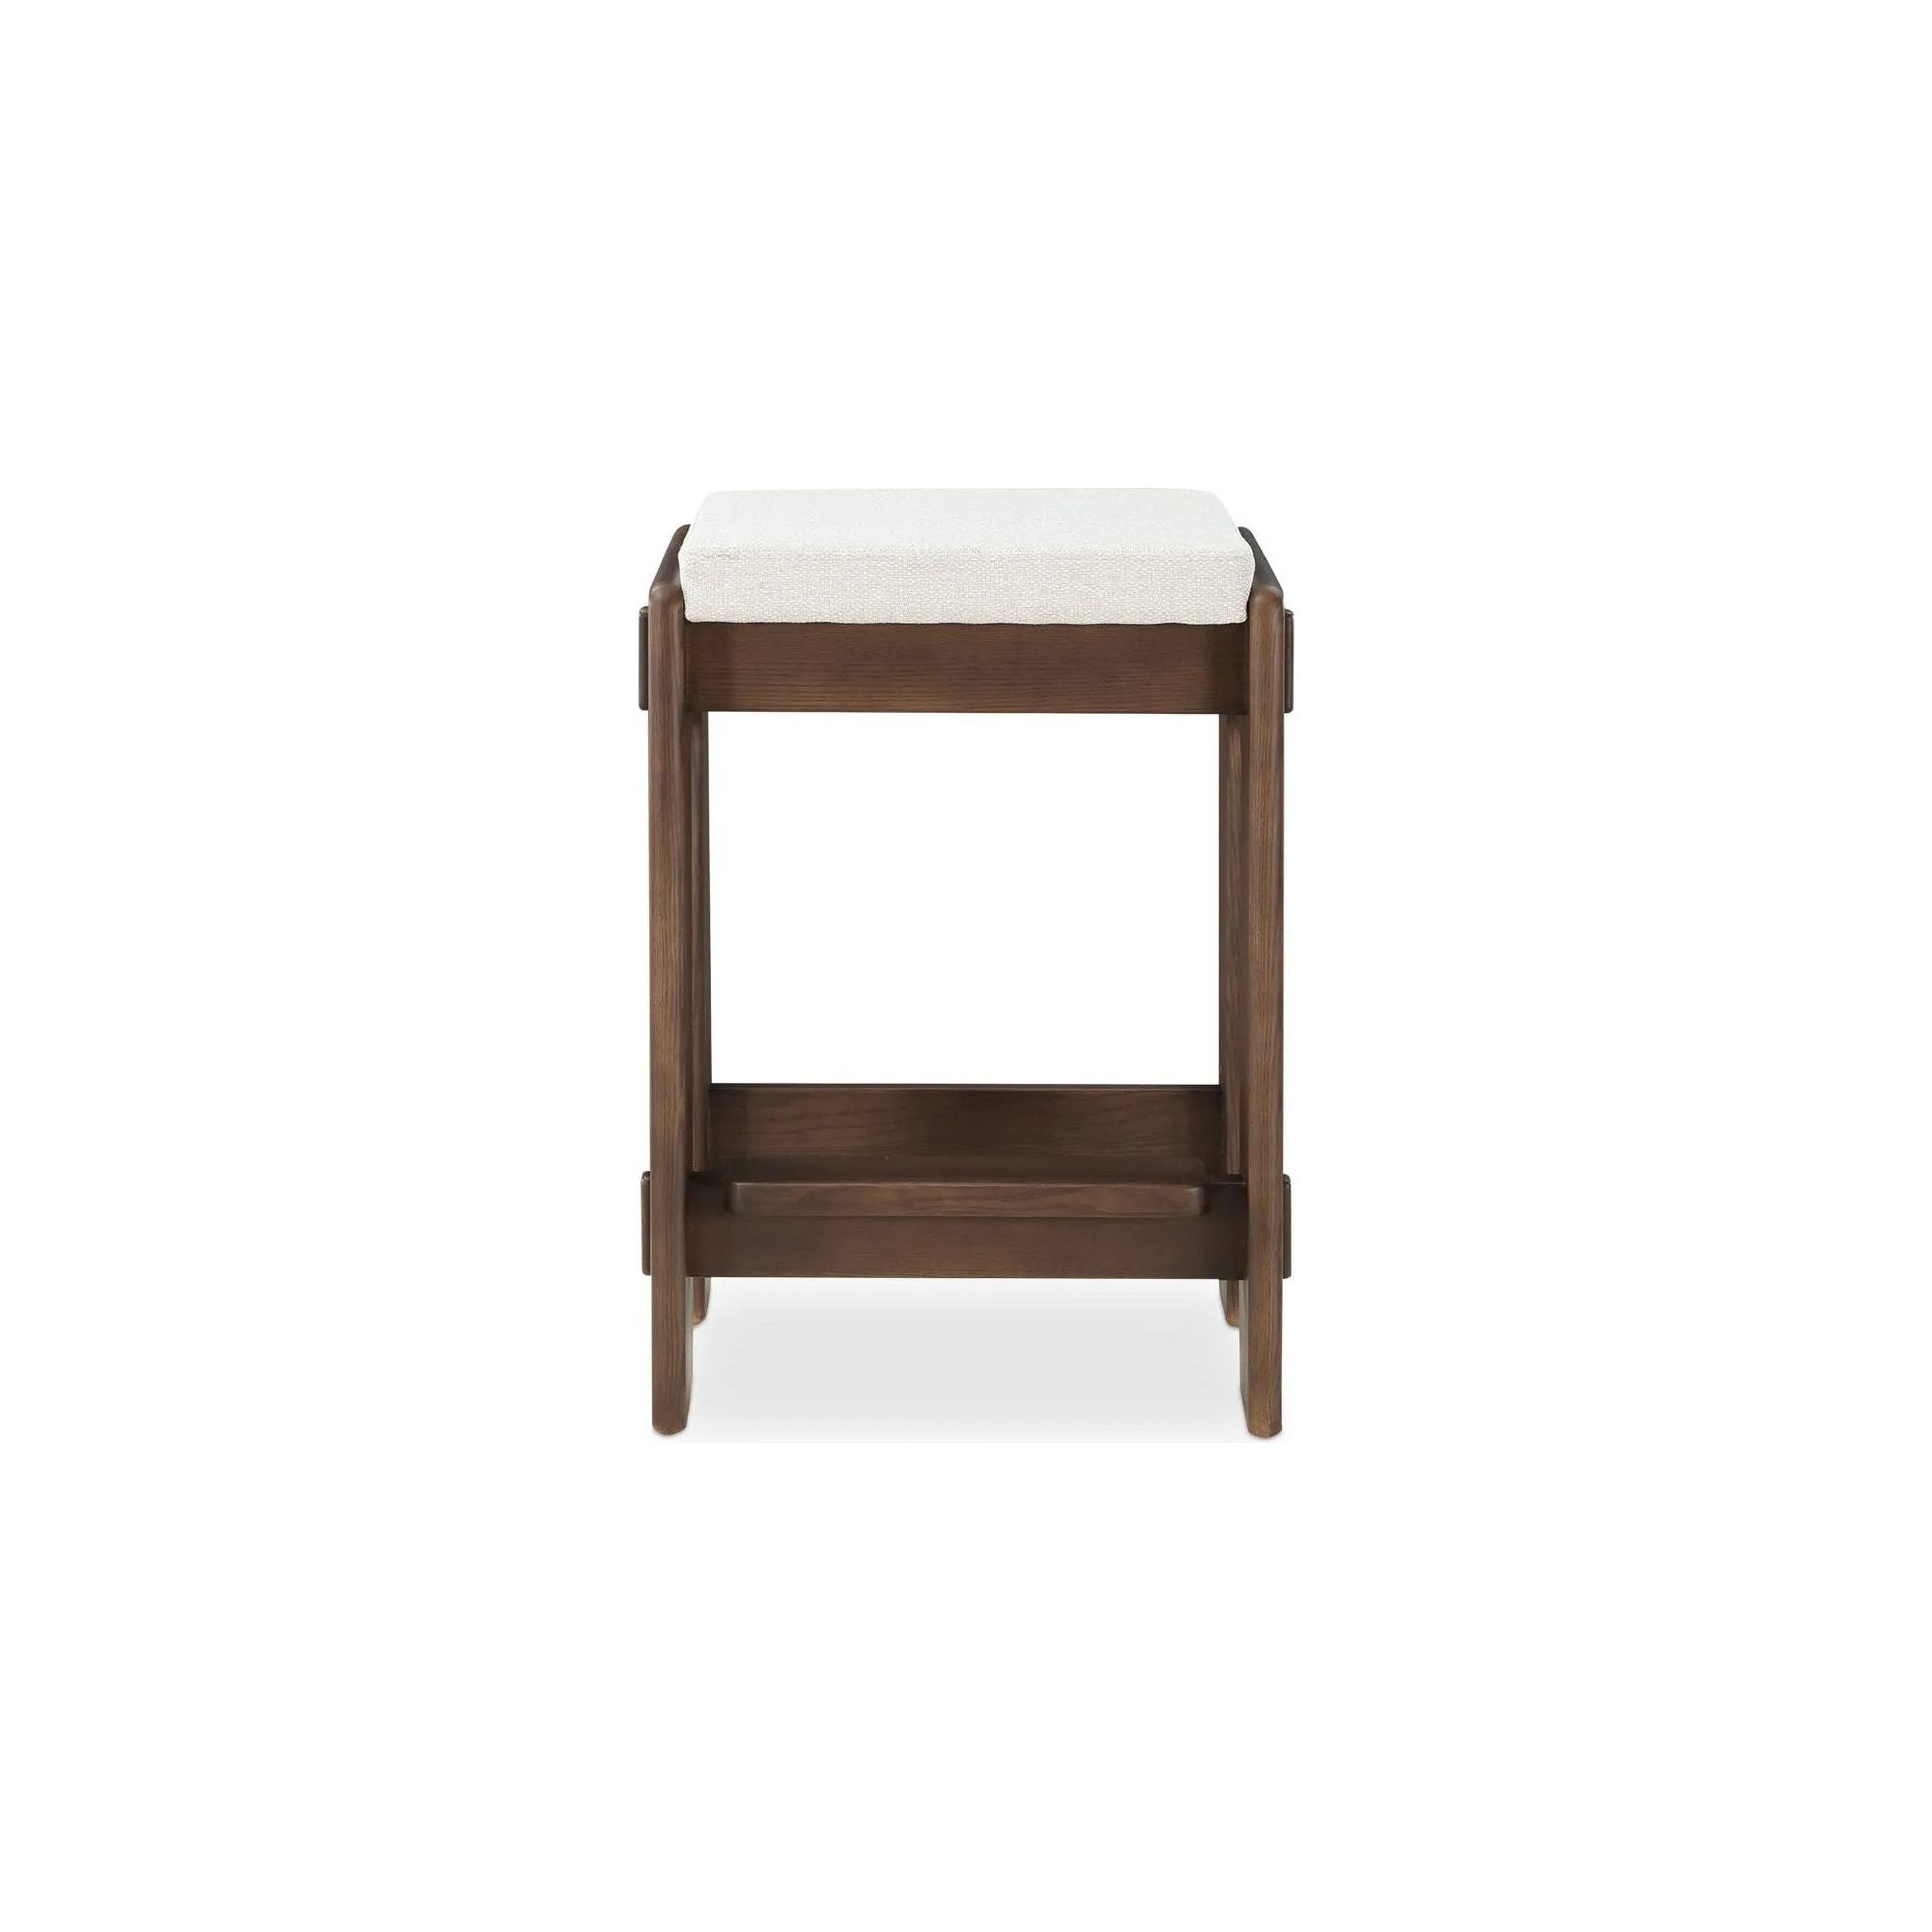 Crafted with a deep connection to Okinawa, Japan, the birthplace of these designs, the Ashby counter stool is inspired by cherished memories of the past with craftsman style joinery detailing Amethyst Home provides interior design, new home construction design consulting, vintage area rugs, and lighting in the Monterey metro area.